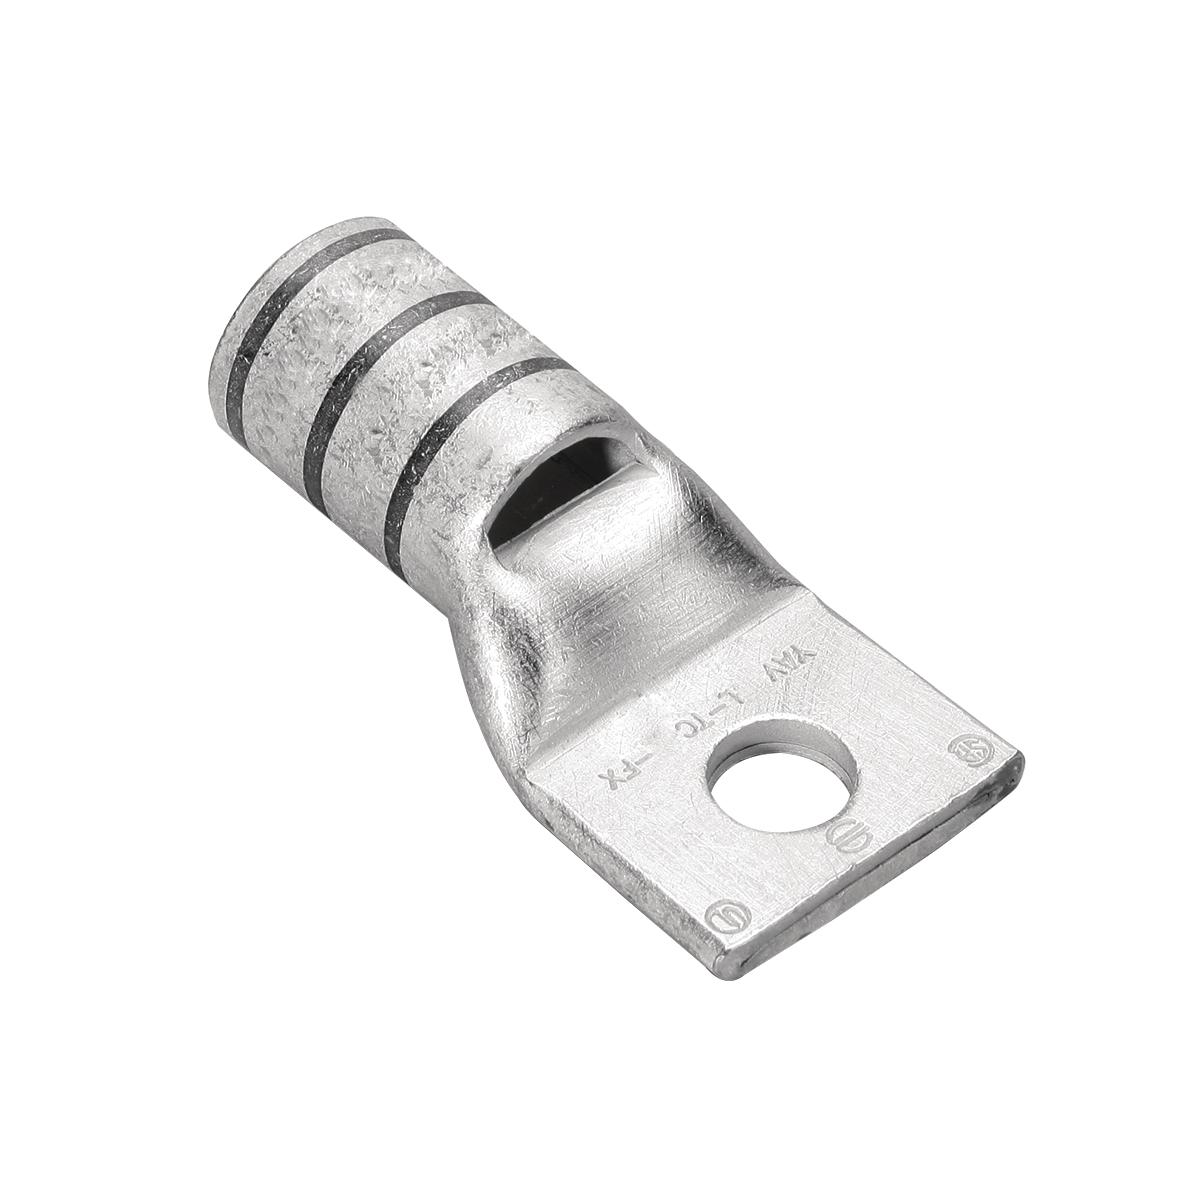 Hubbell YA38LTC58FX Copper Compression Lug, 1 Hole w/ Inspection Window, 500 Flex, 5/8" Stud, Short Barrel, Tin Plated.  ; Features: UL Listed 90 DEG C, 600 V - 35 KV, 45 DEG And 90 DEG Angles Are Available, Tongue Angle: Straight, Temperature Rating: 90 DEG C, Finish: Elect